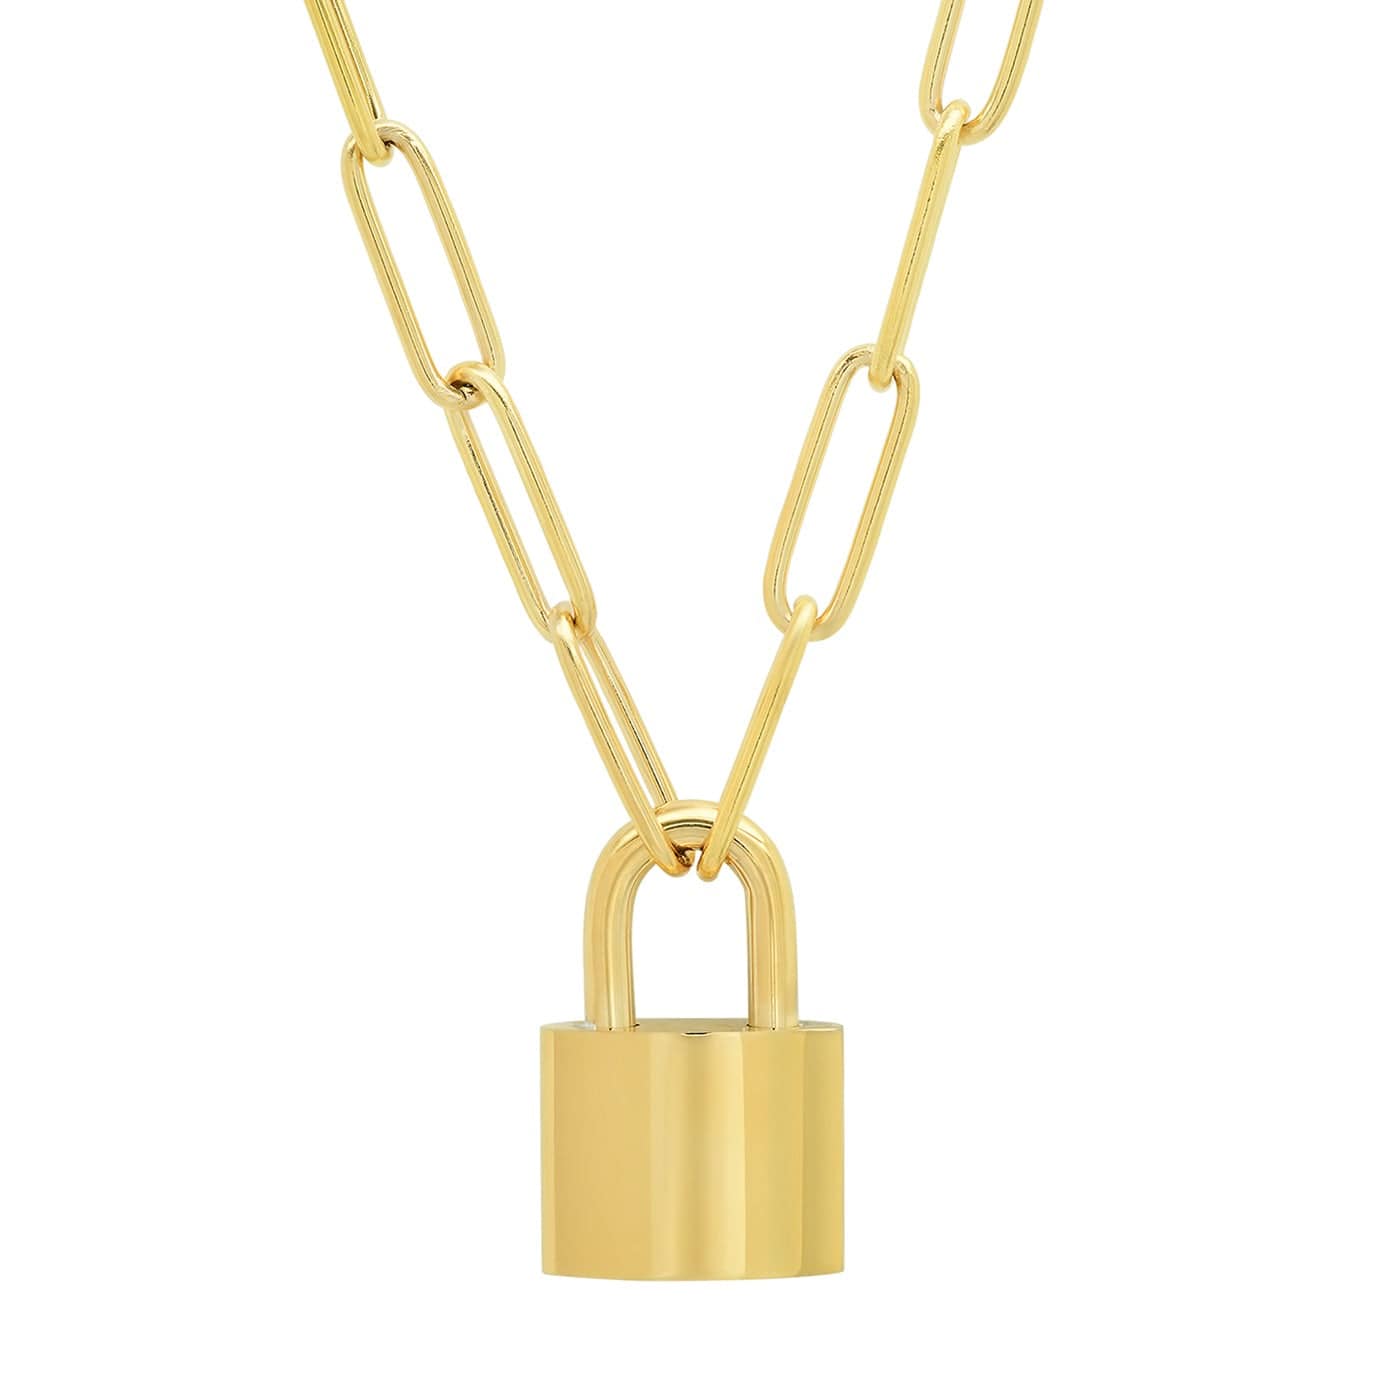 TAI JEWELRY Necklace Oval Chain Link With Lock Pendant